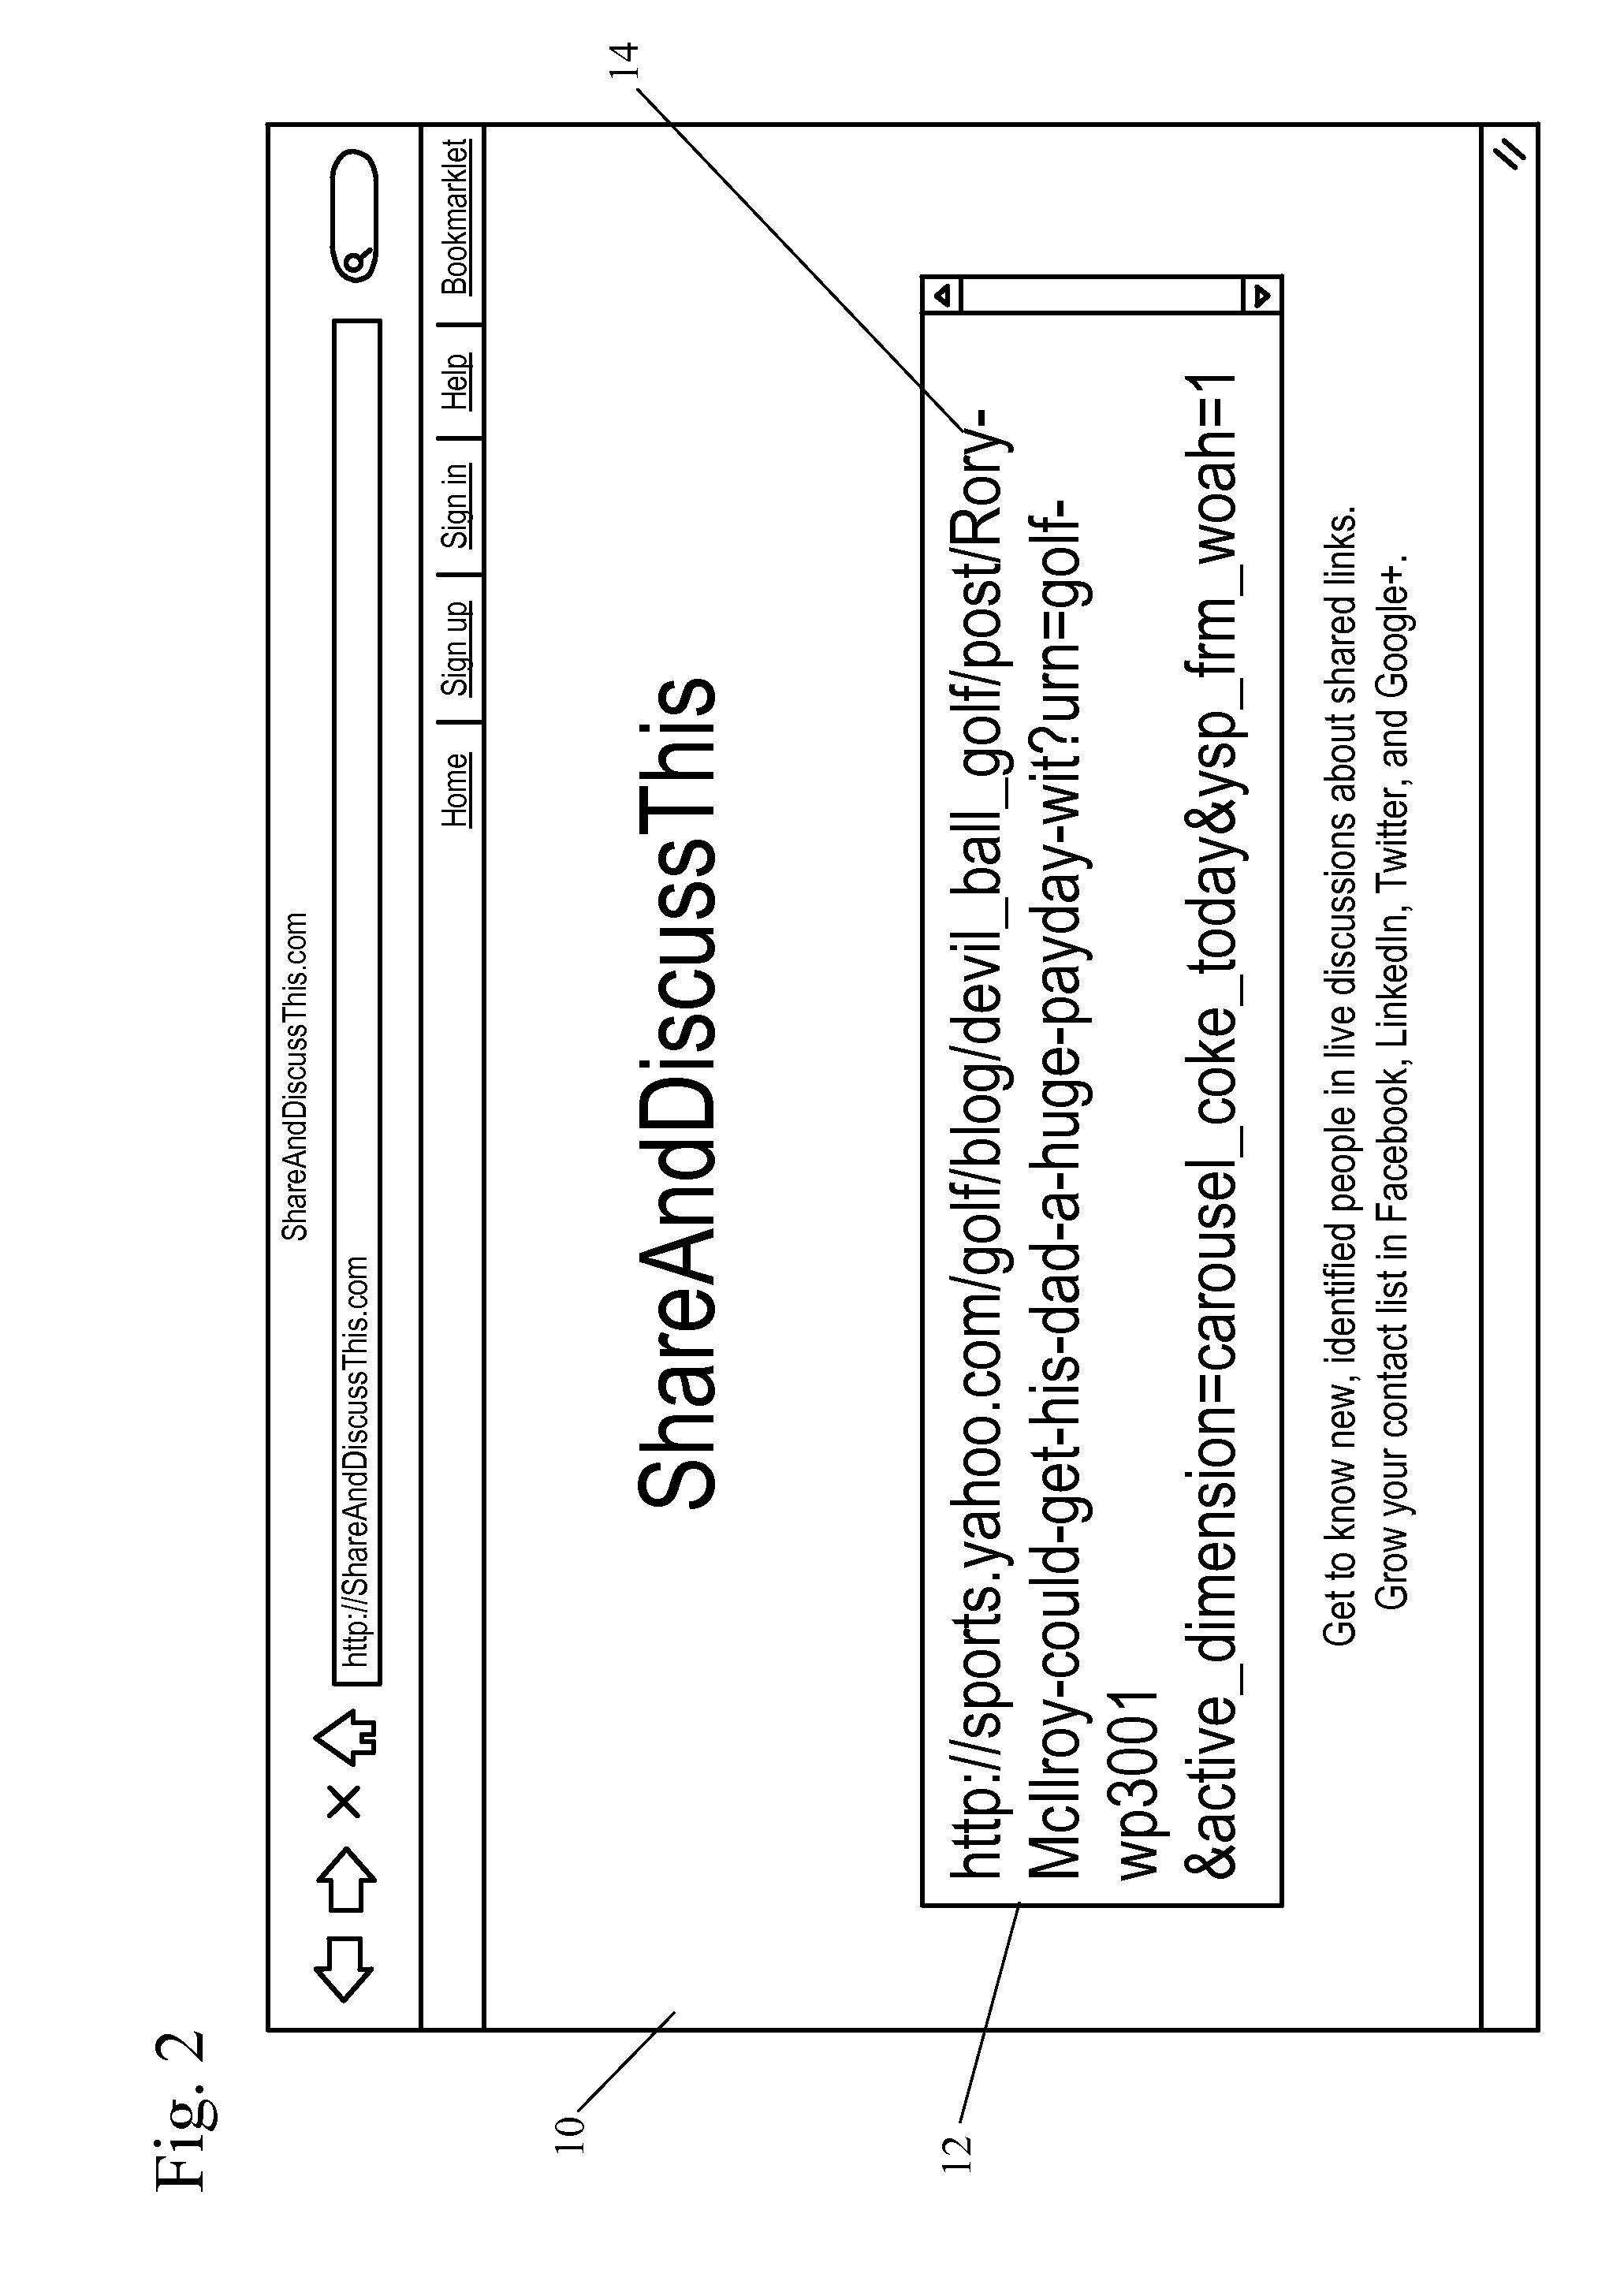 Methods of Sharing a Uniform Resource Locator (URL), and a URL Sharing Utility and Social Network Facilitating Group Chat about Shared Links